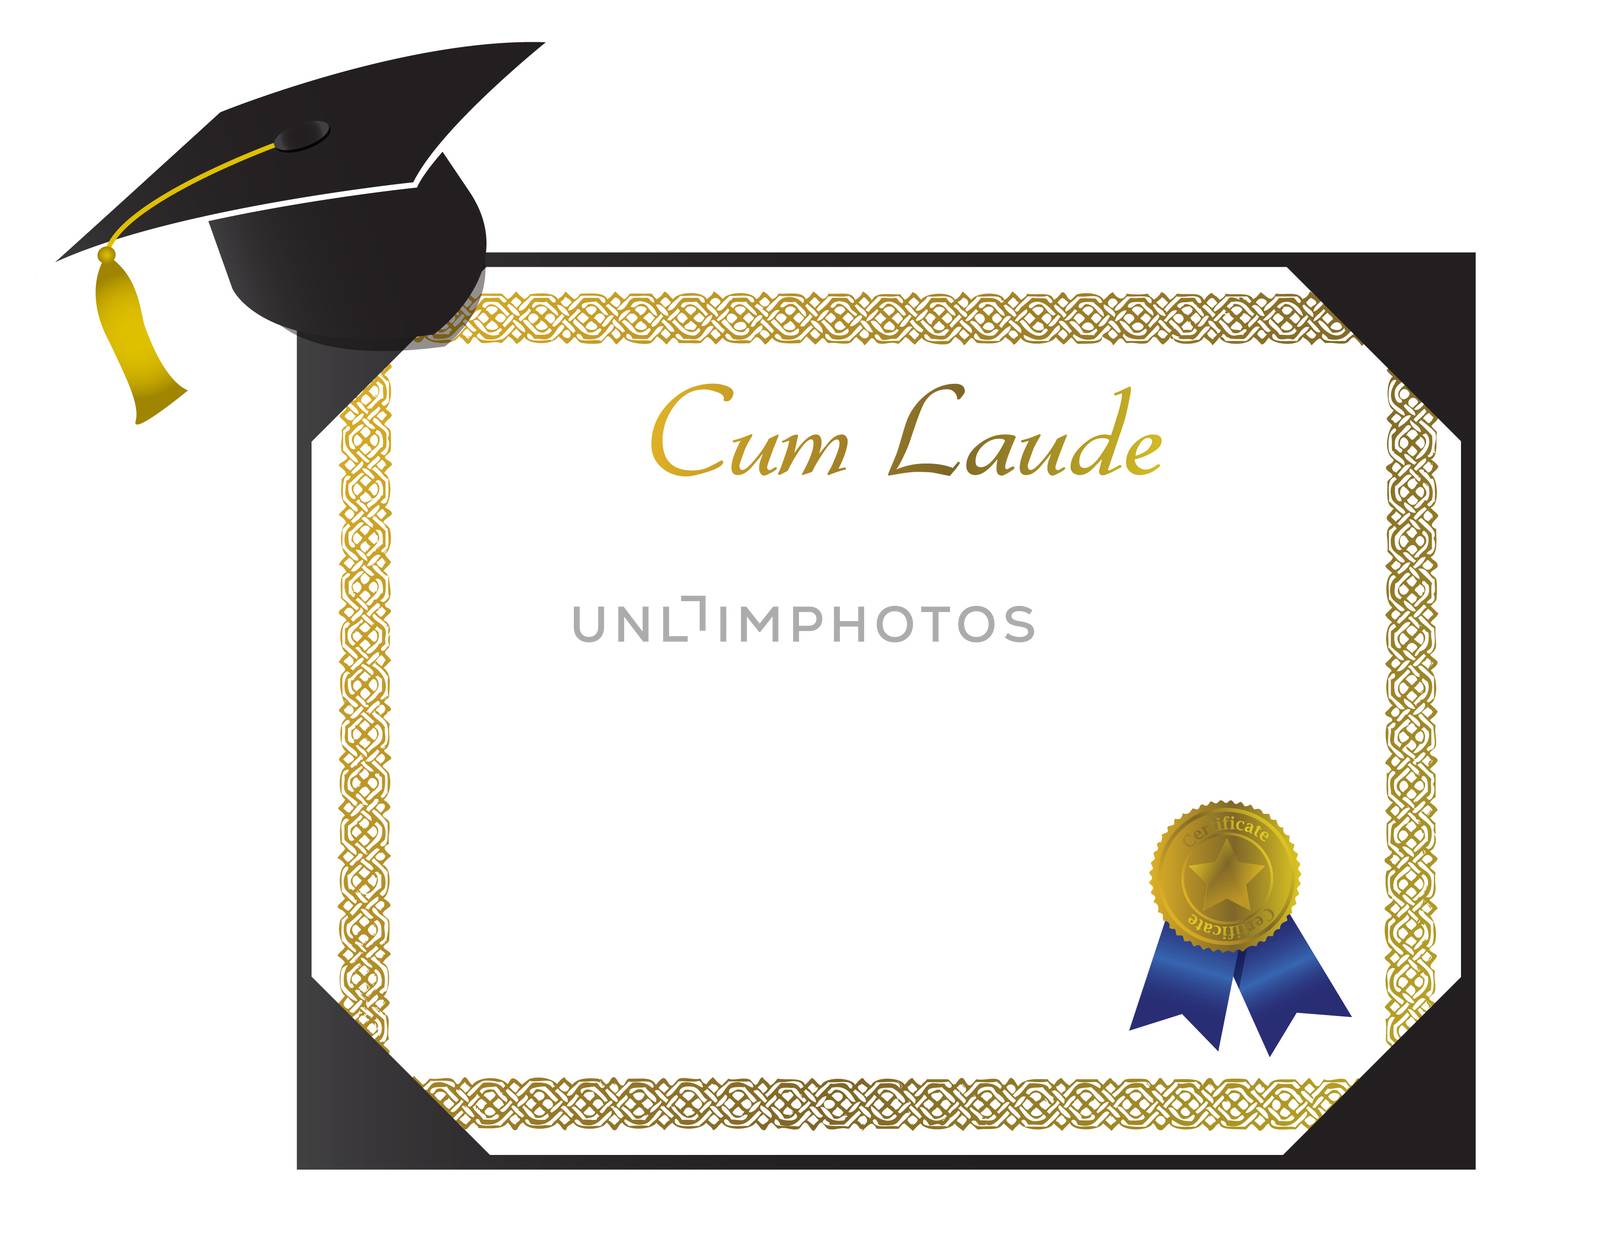 Cum Laude College Diploma with cap and tassel by alexmillos